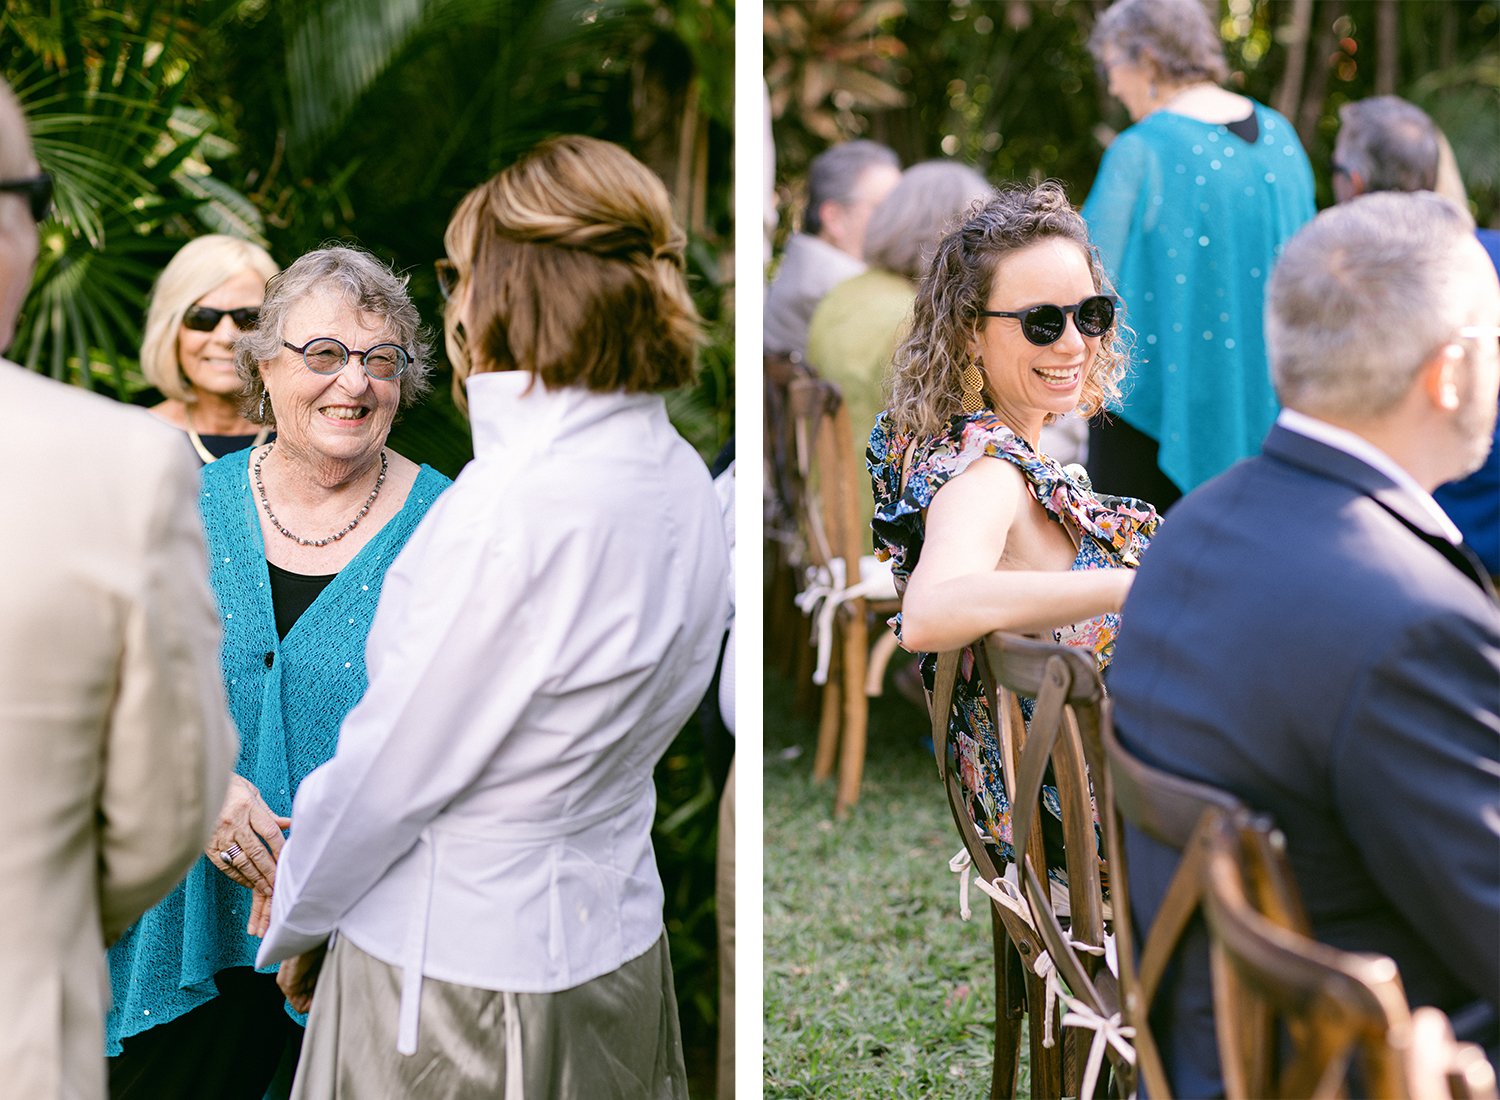 20 smiling happy wedding guests conversating with family and friends before the ceremony at Rosewood Mayakoba Riviera Maya Cancun.JPG